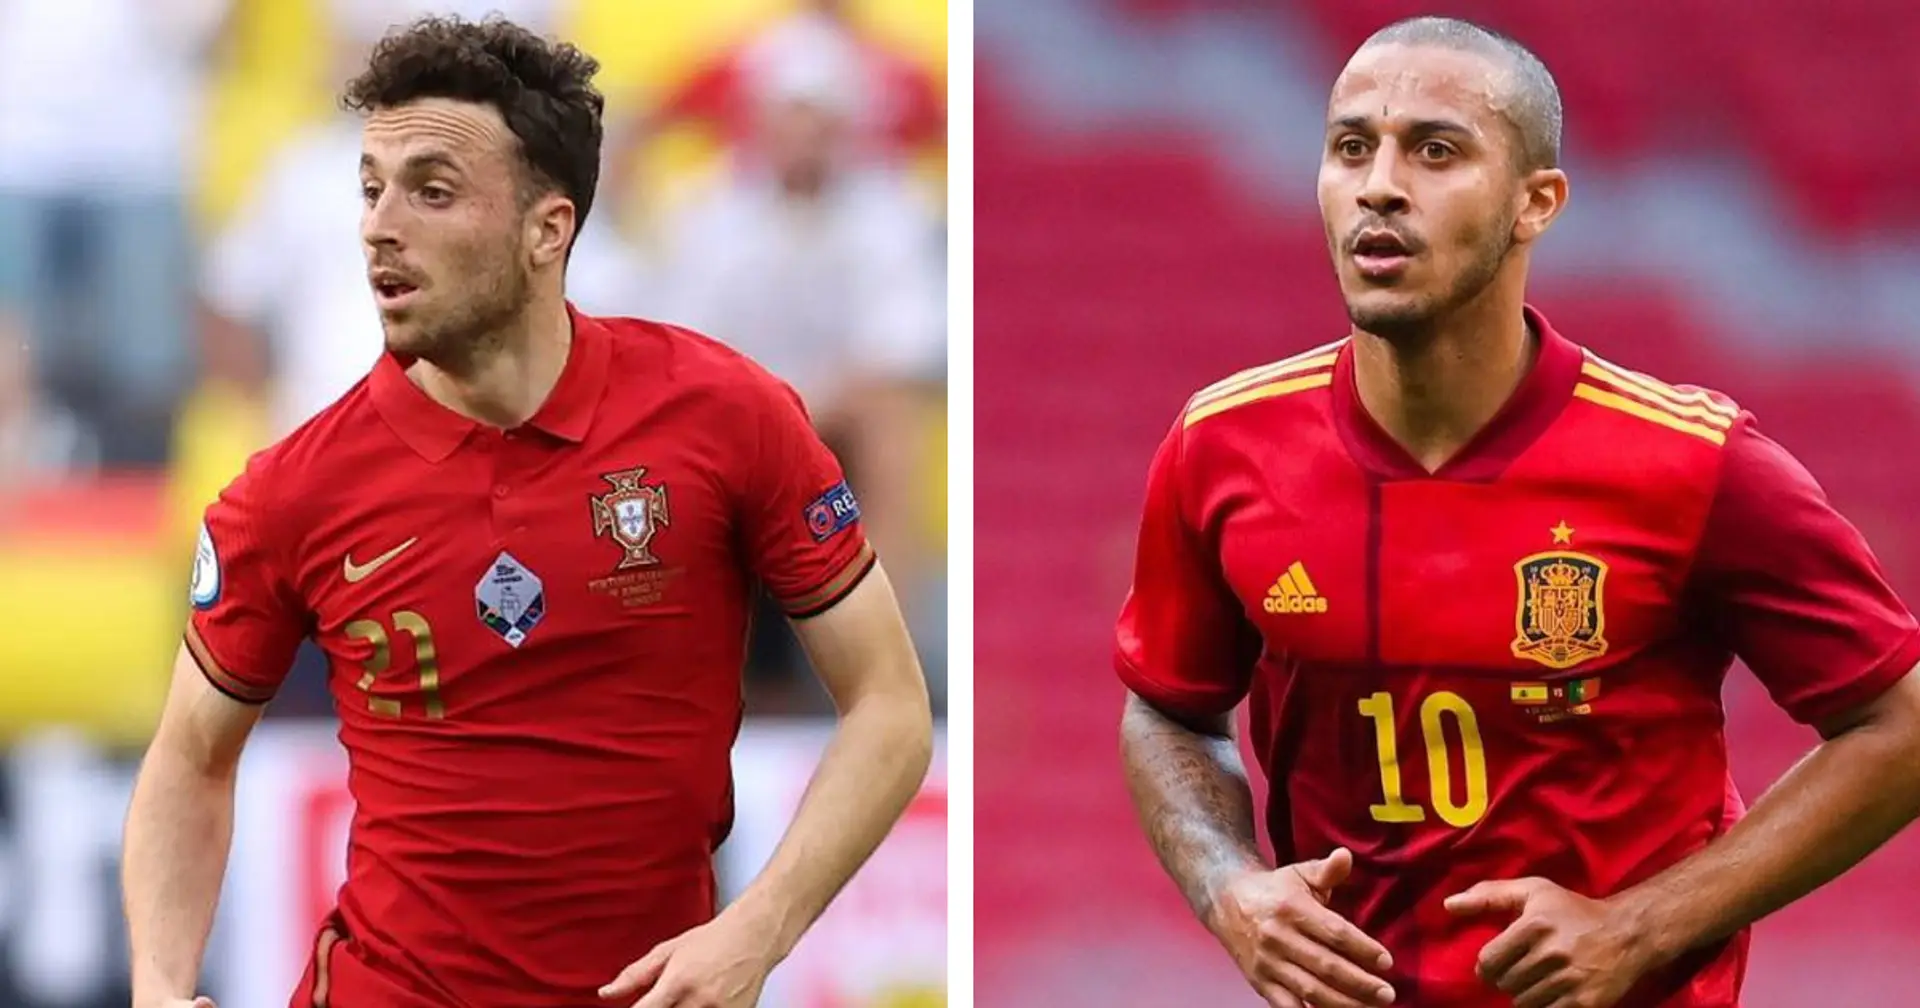 Thiago and Diogo Jota join 4 other Liverpool players in Euro 2020 Round of 16